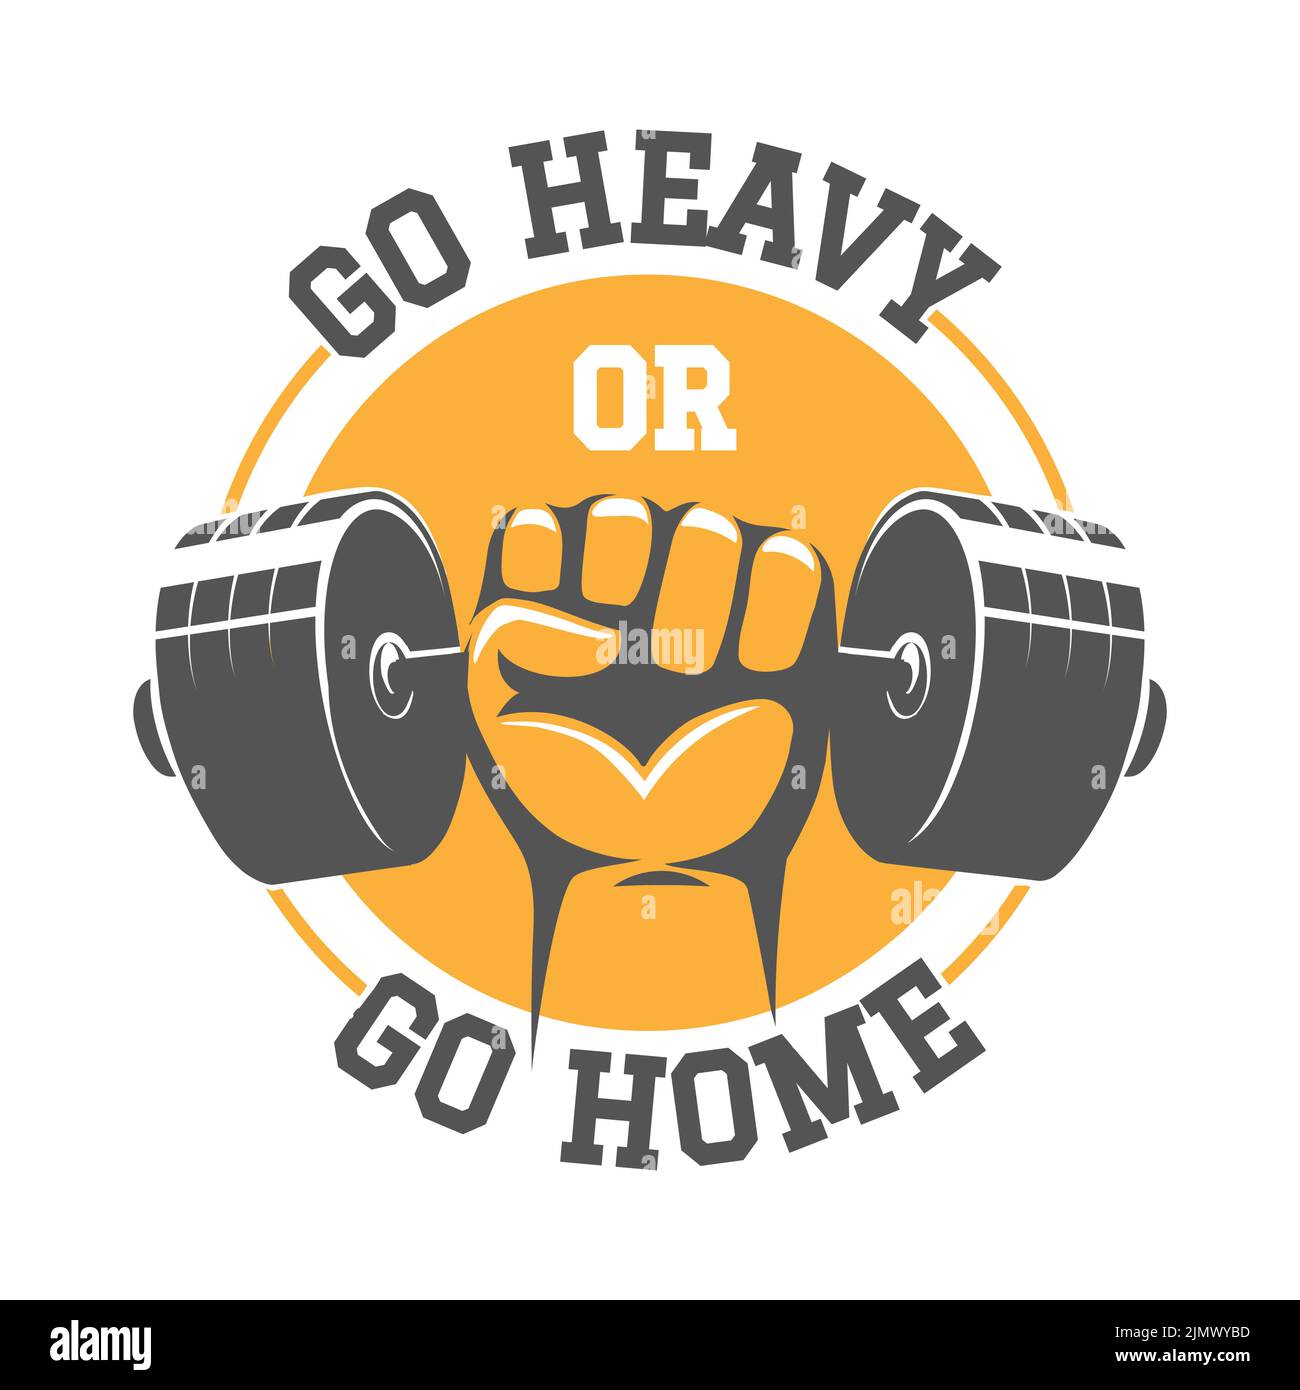 Fitness or Athletic Club Emblem. Fist Holds Barbell and motivation wording Go Heavy or Go Home. Vector illustration. Stock Vector